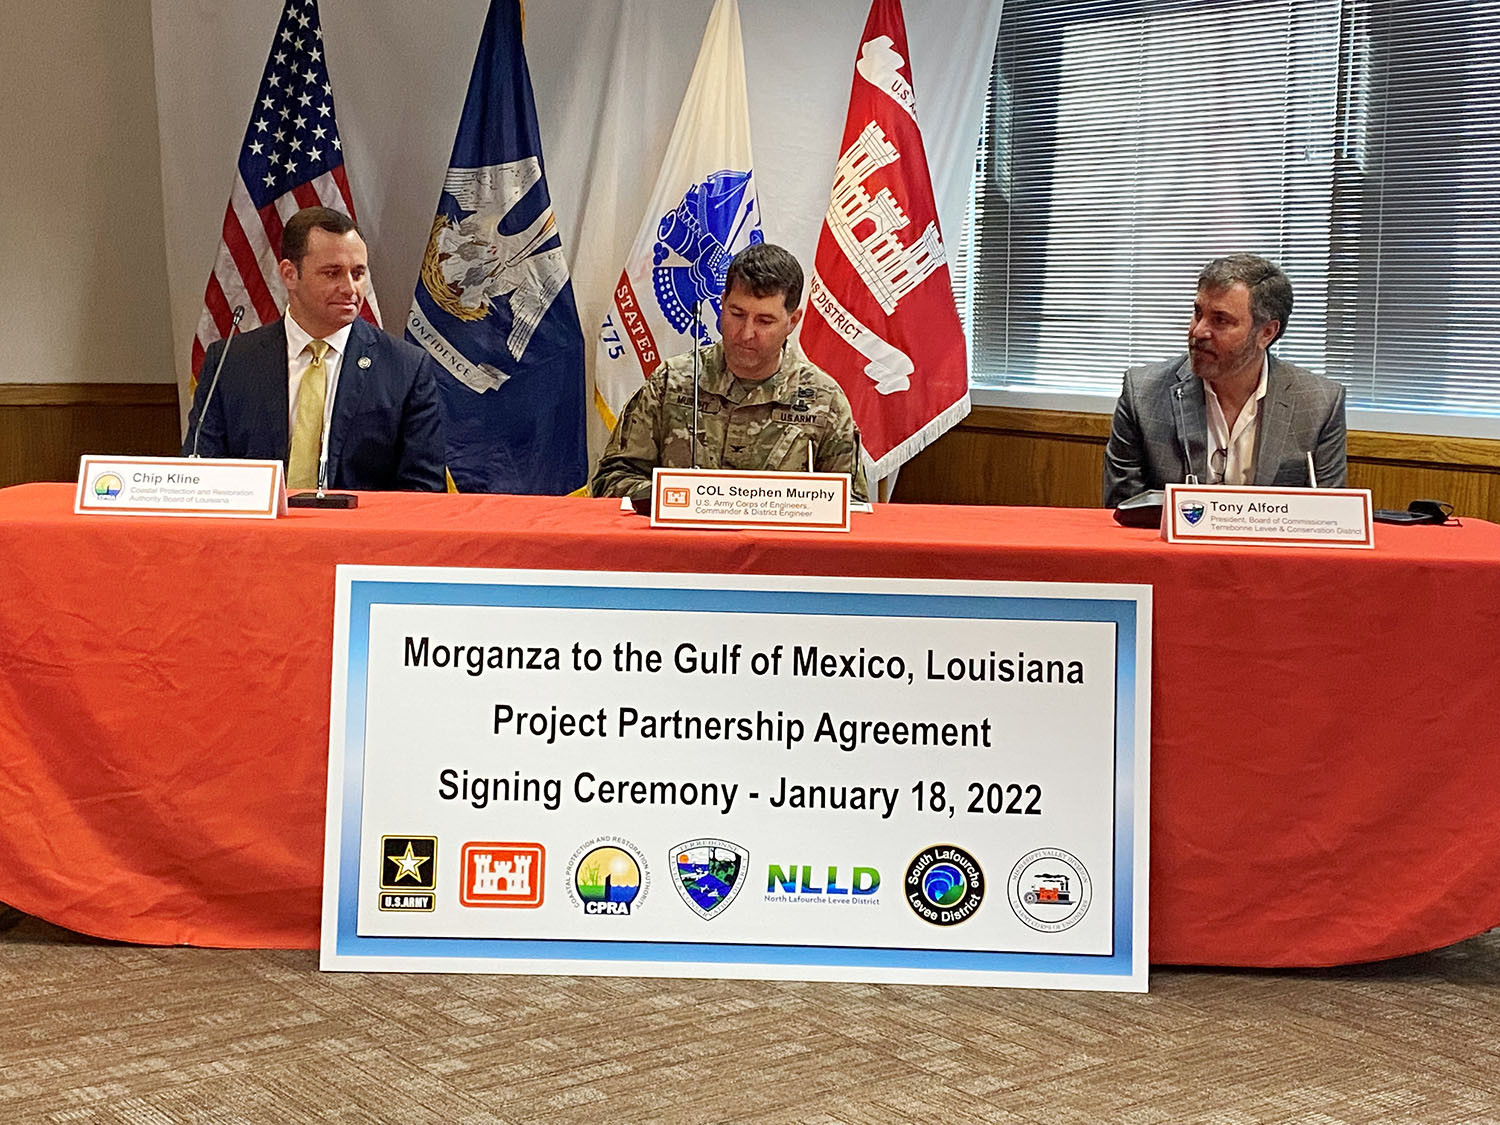 Project Partnership Agreement Signed For Morganza Project